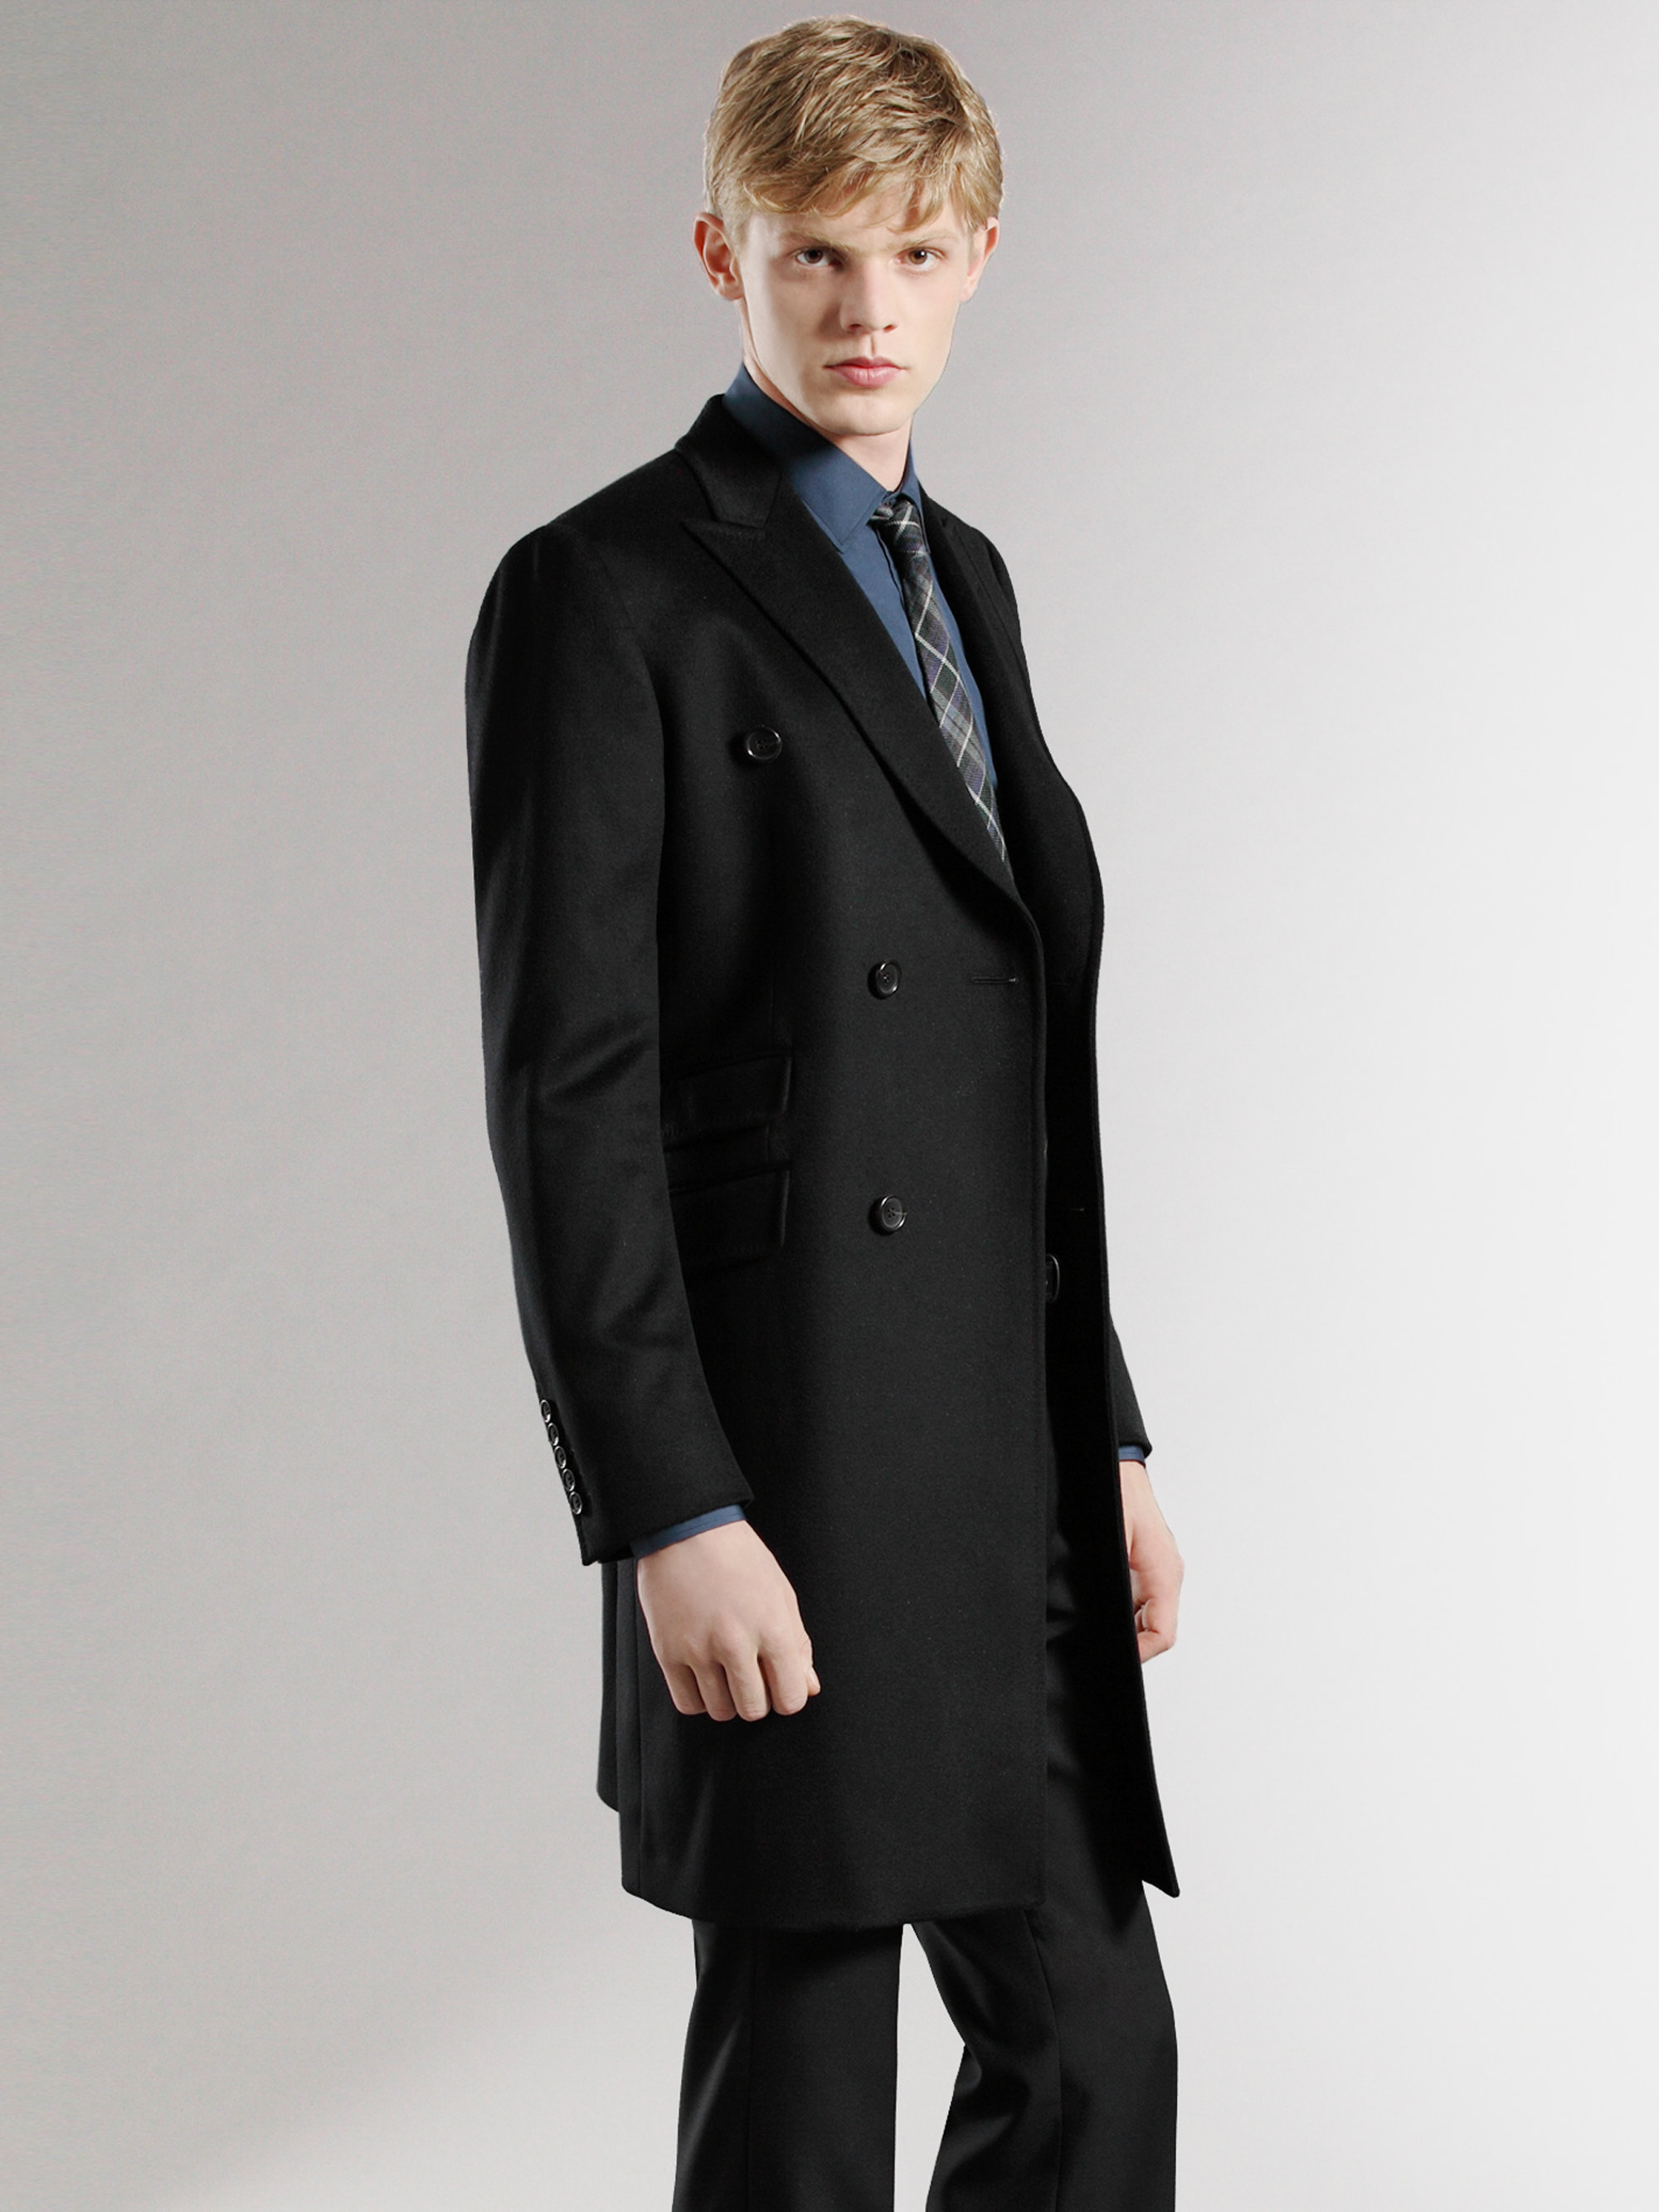 Lyst - Gucci Doublebreasted Wool Coat in Black for Men